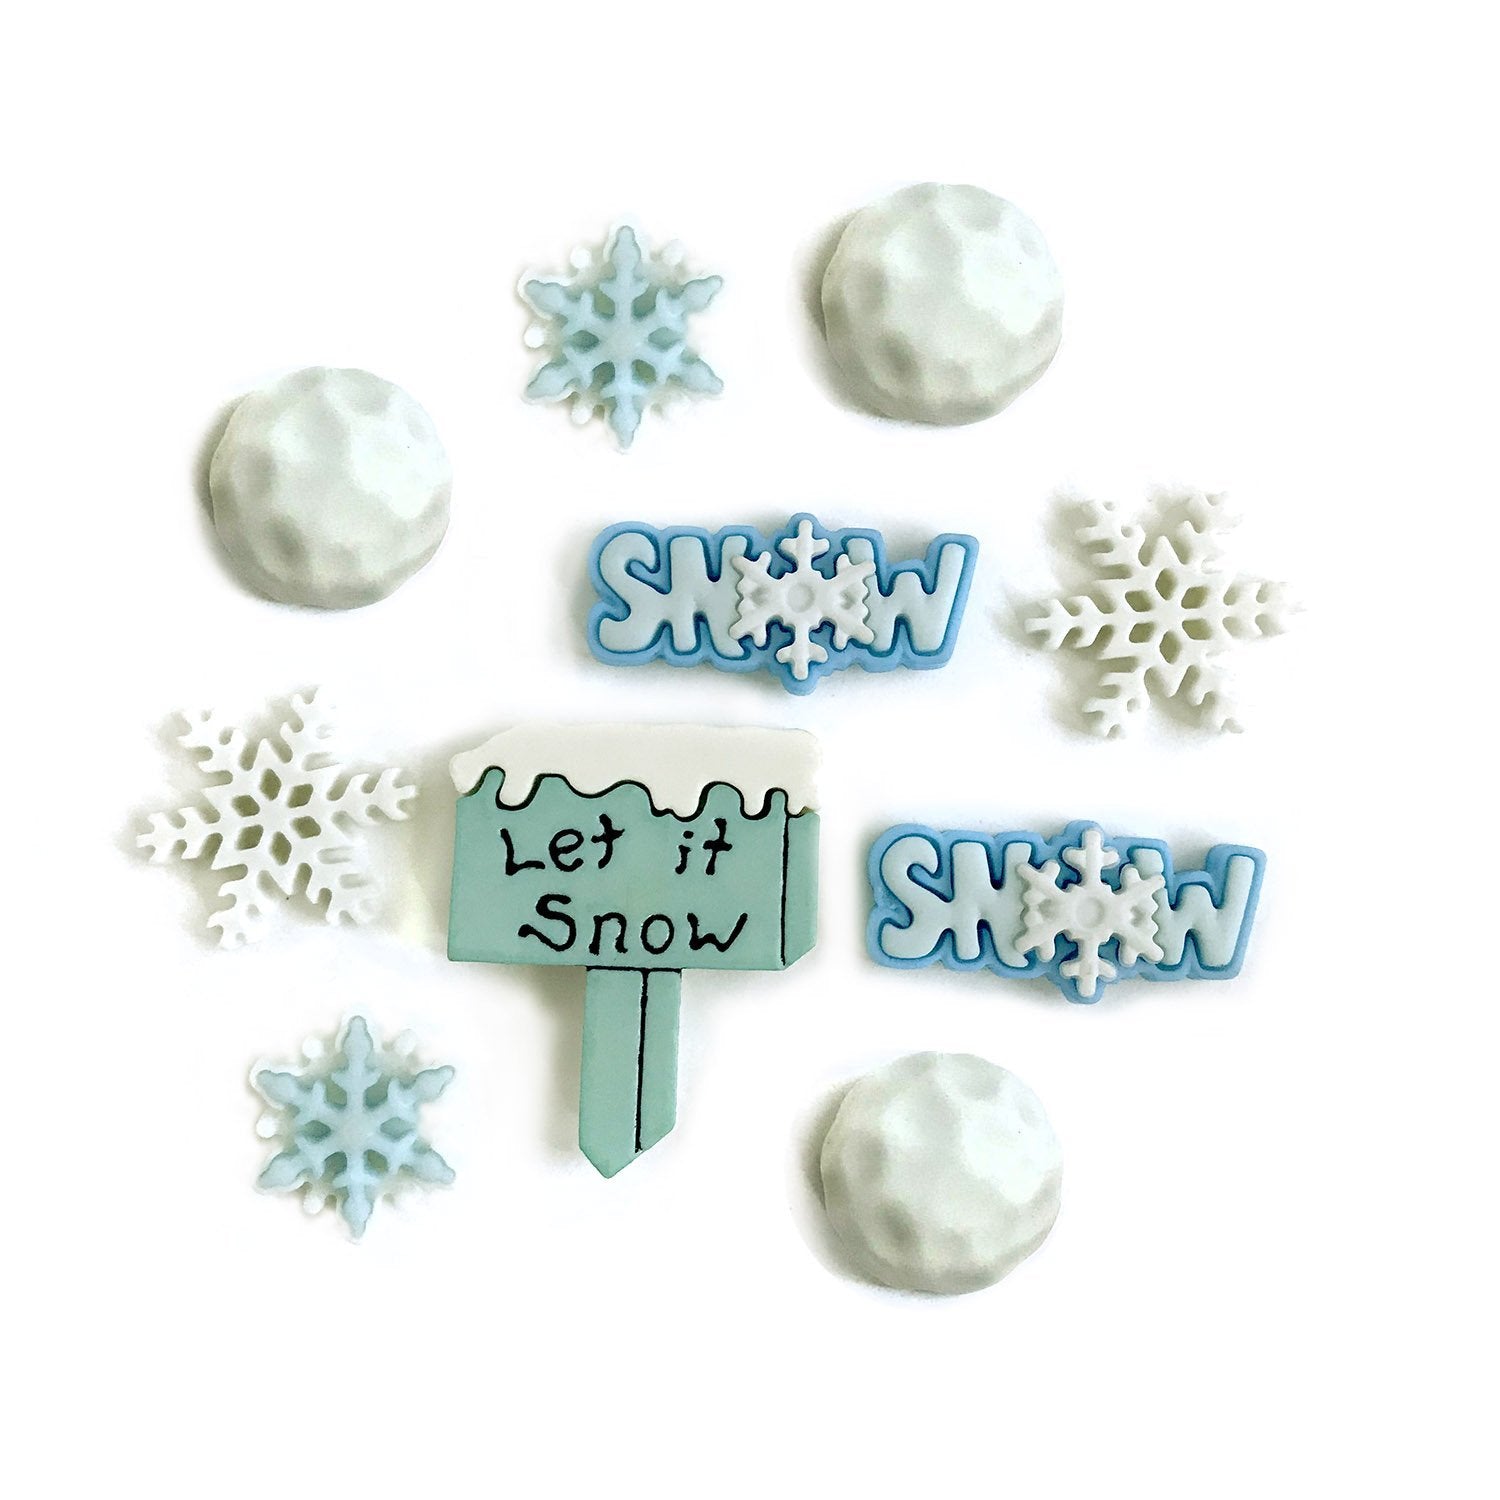 Brrr, Snowflake Buttons, Sewing Embellishment, Blue White